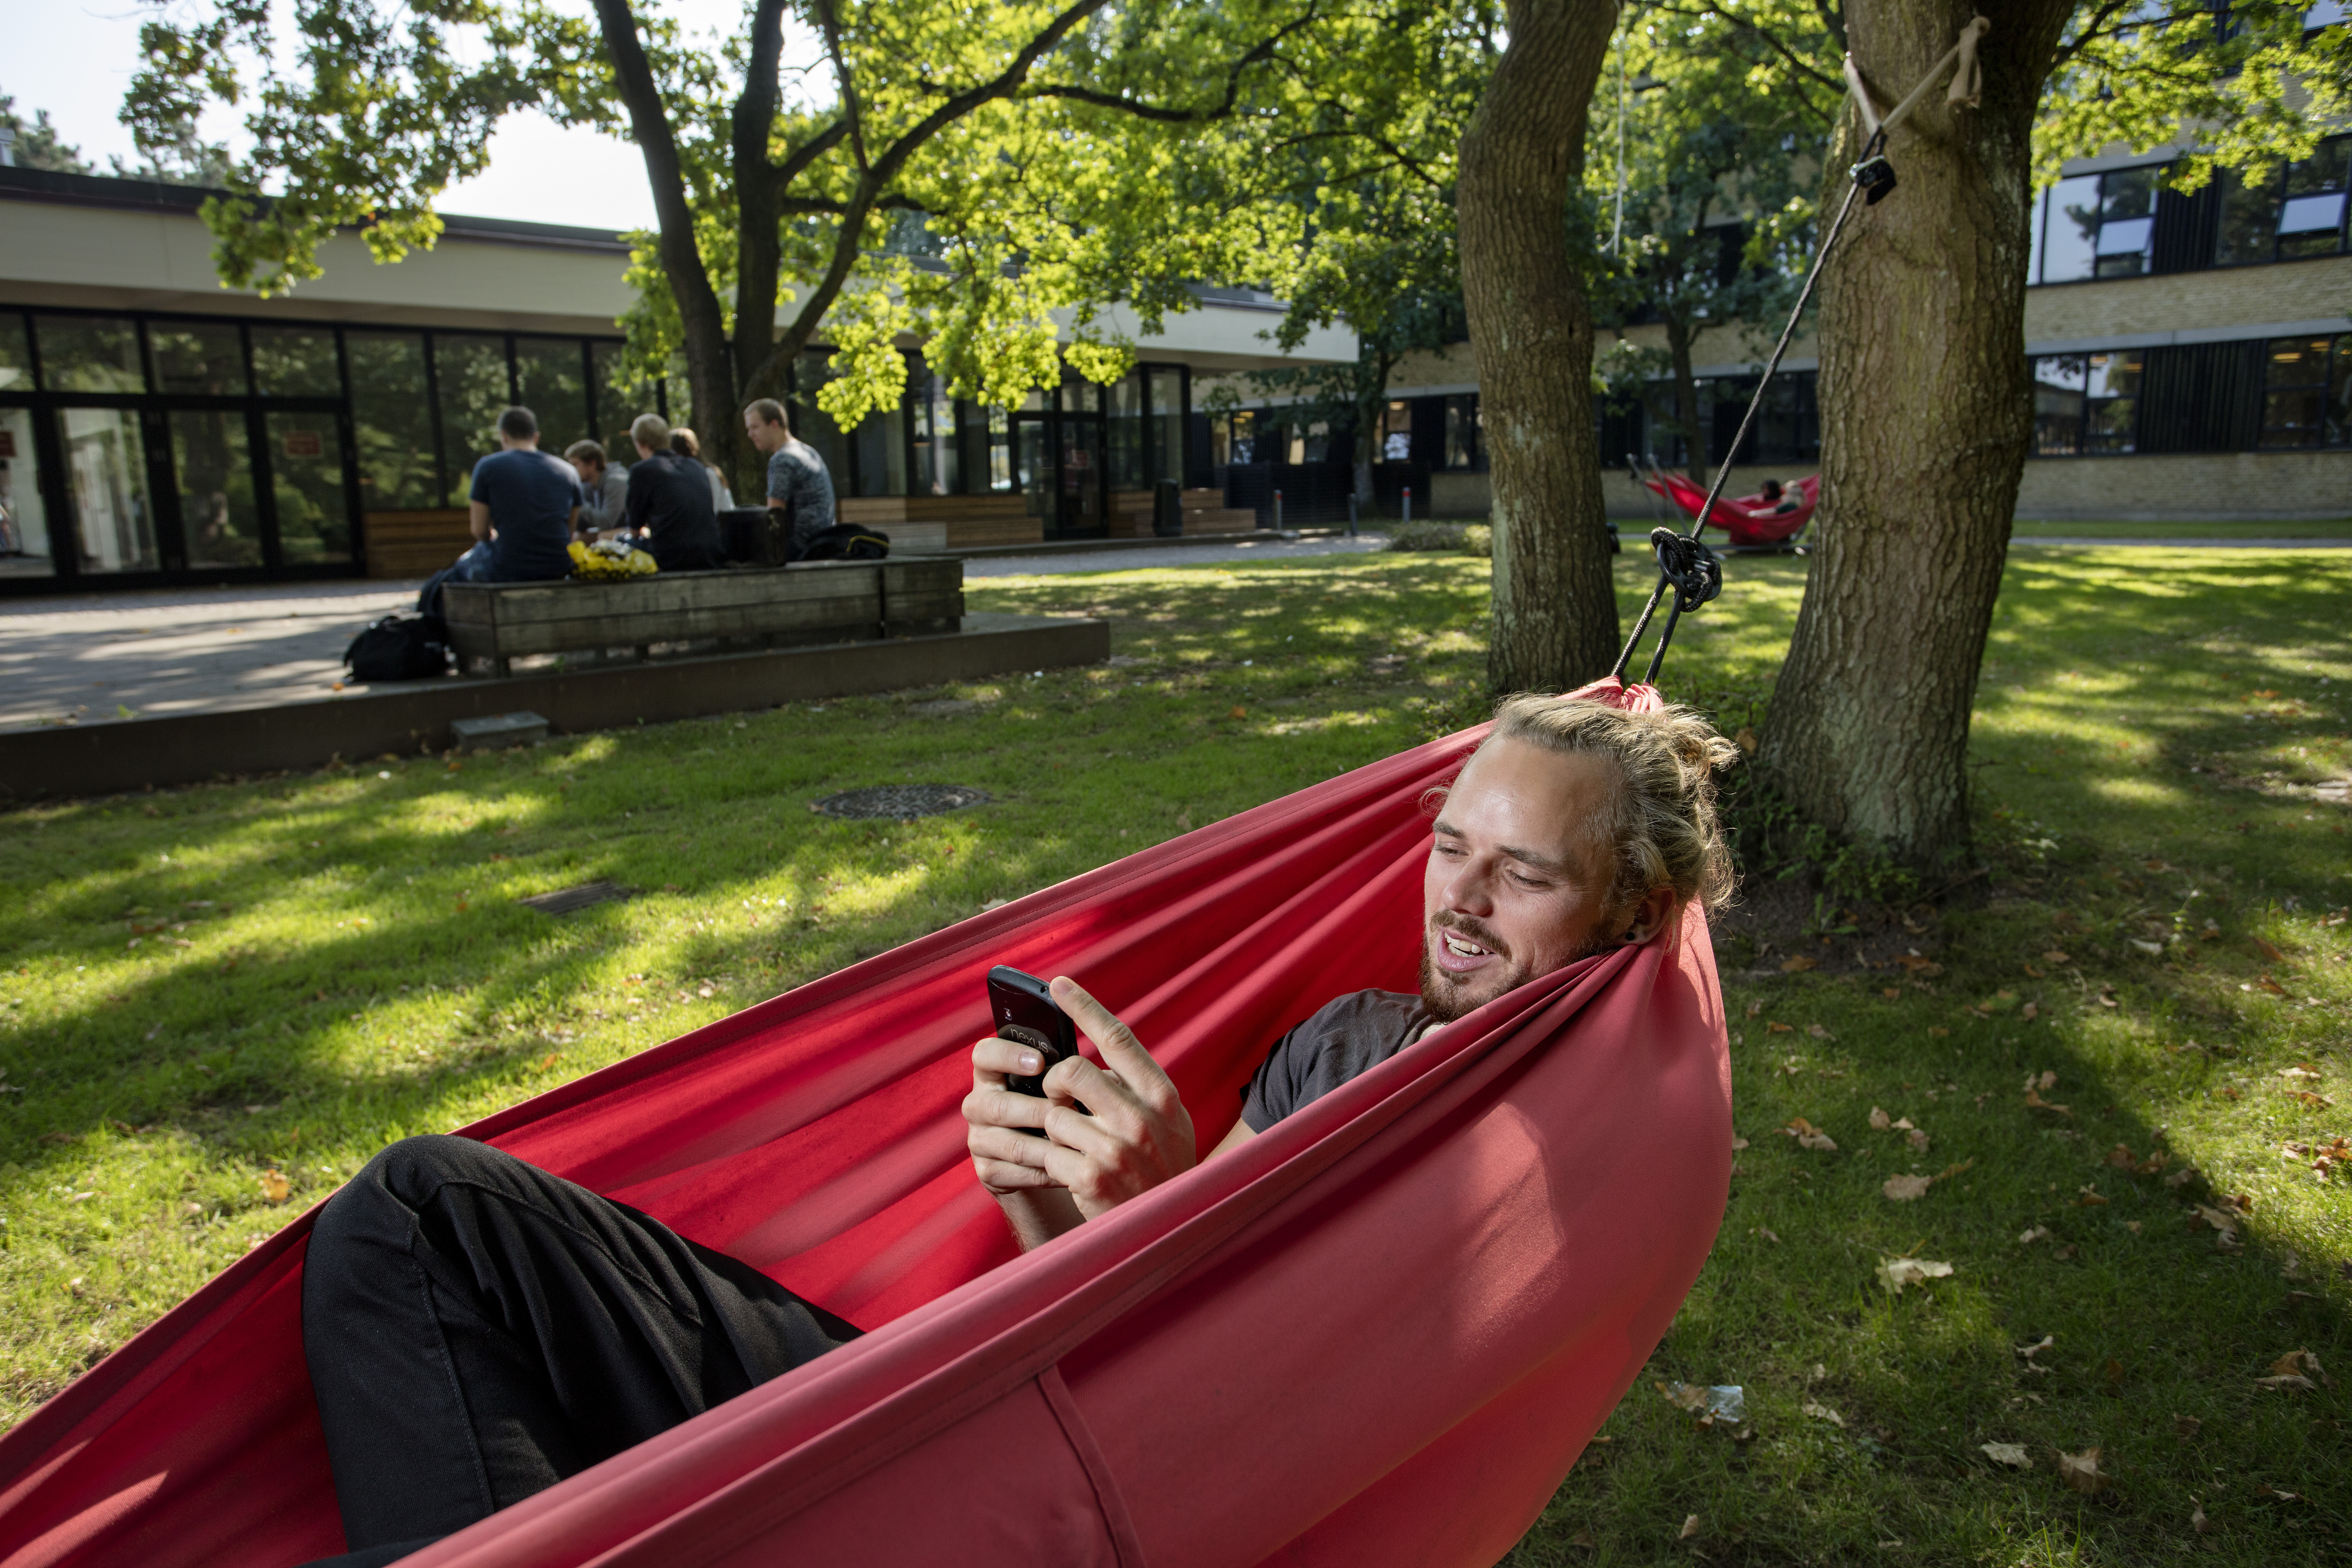 Student in hammock with phone